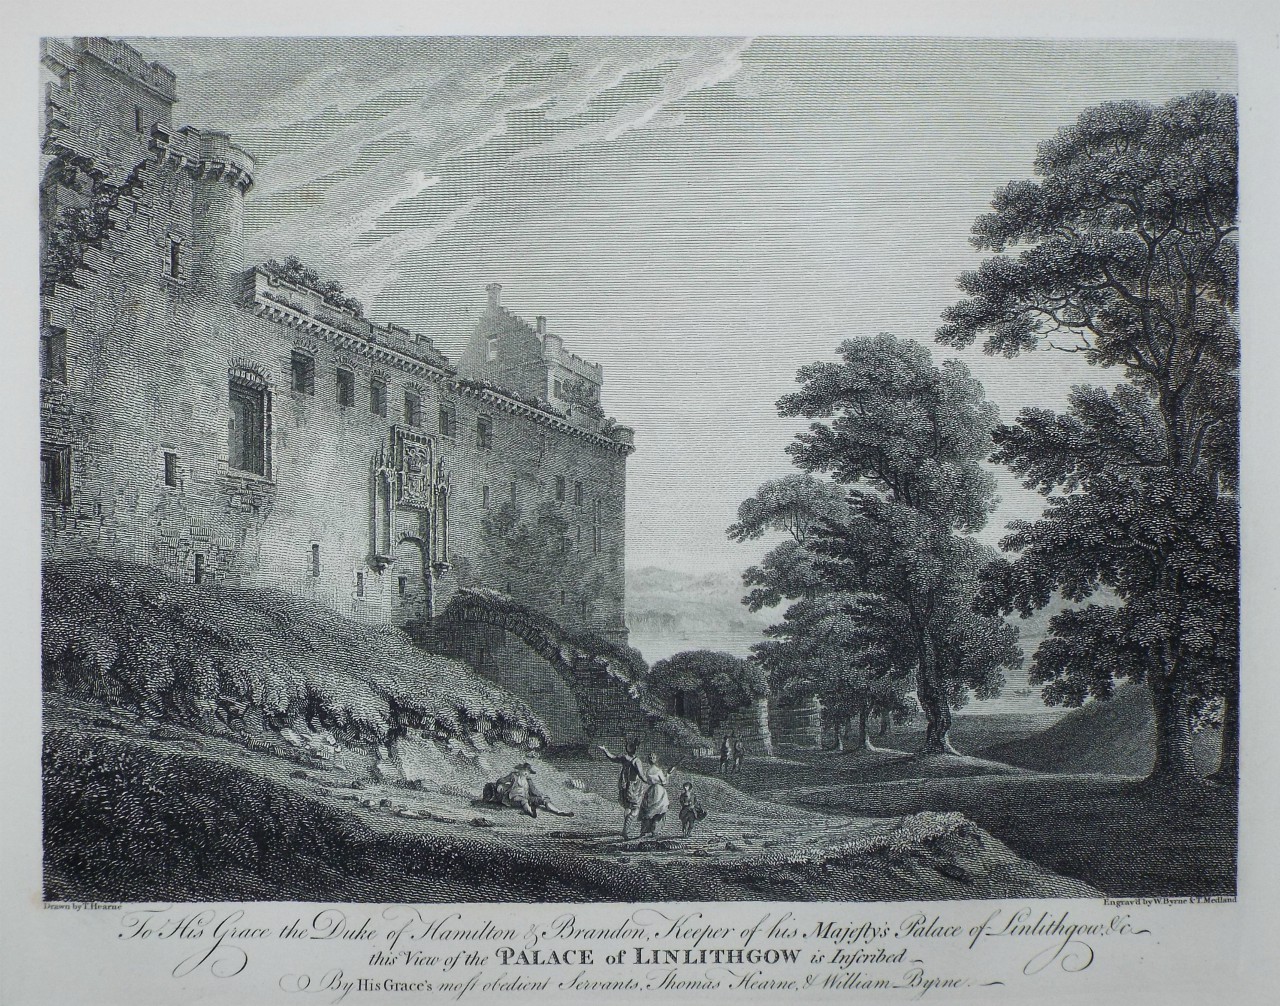 Print - Palace of Linlithgow - Byrne